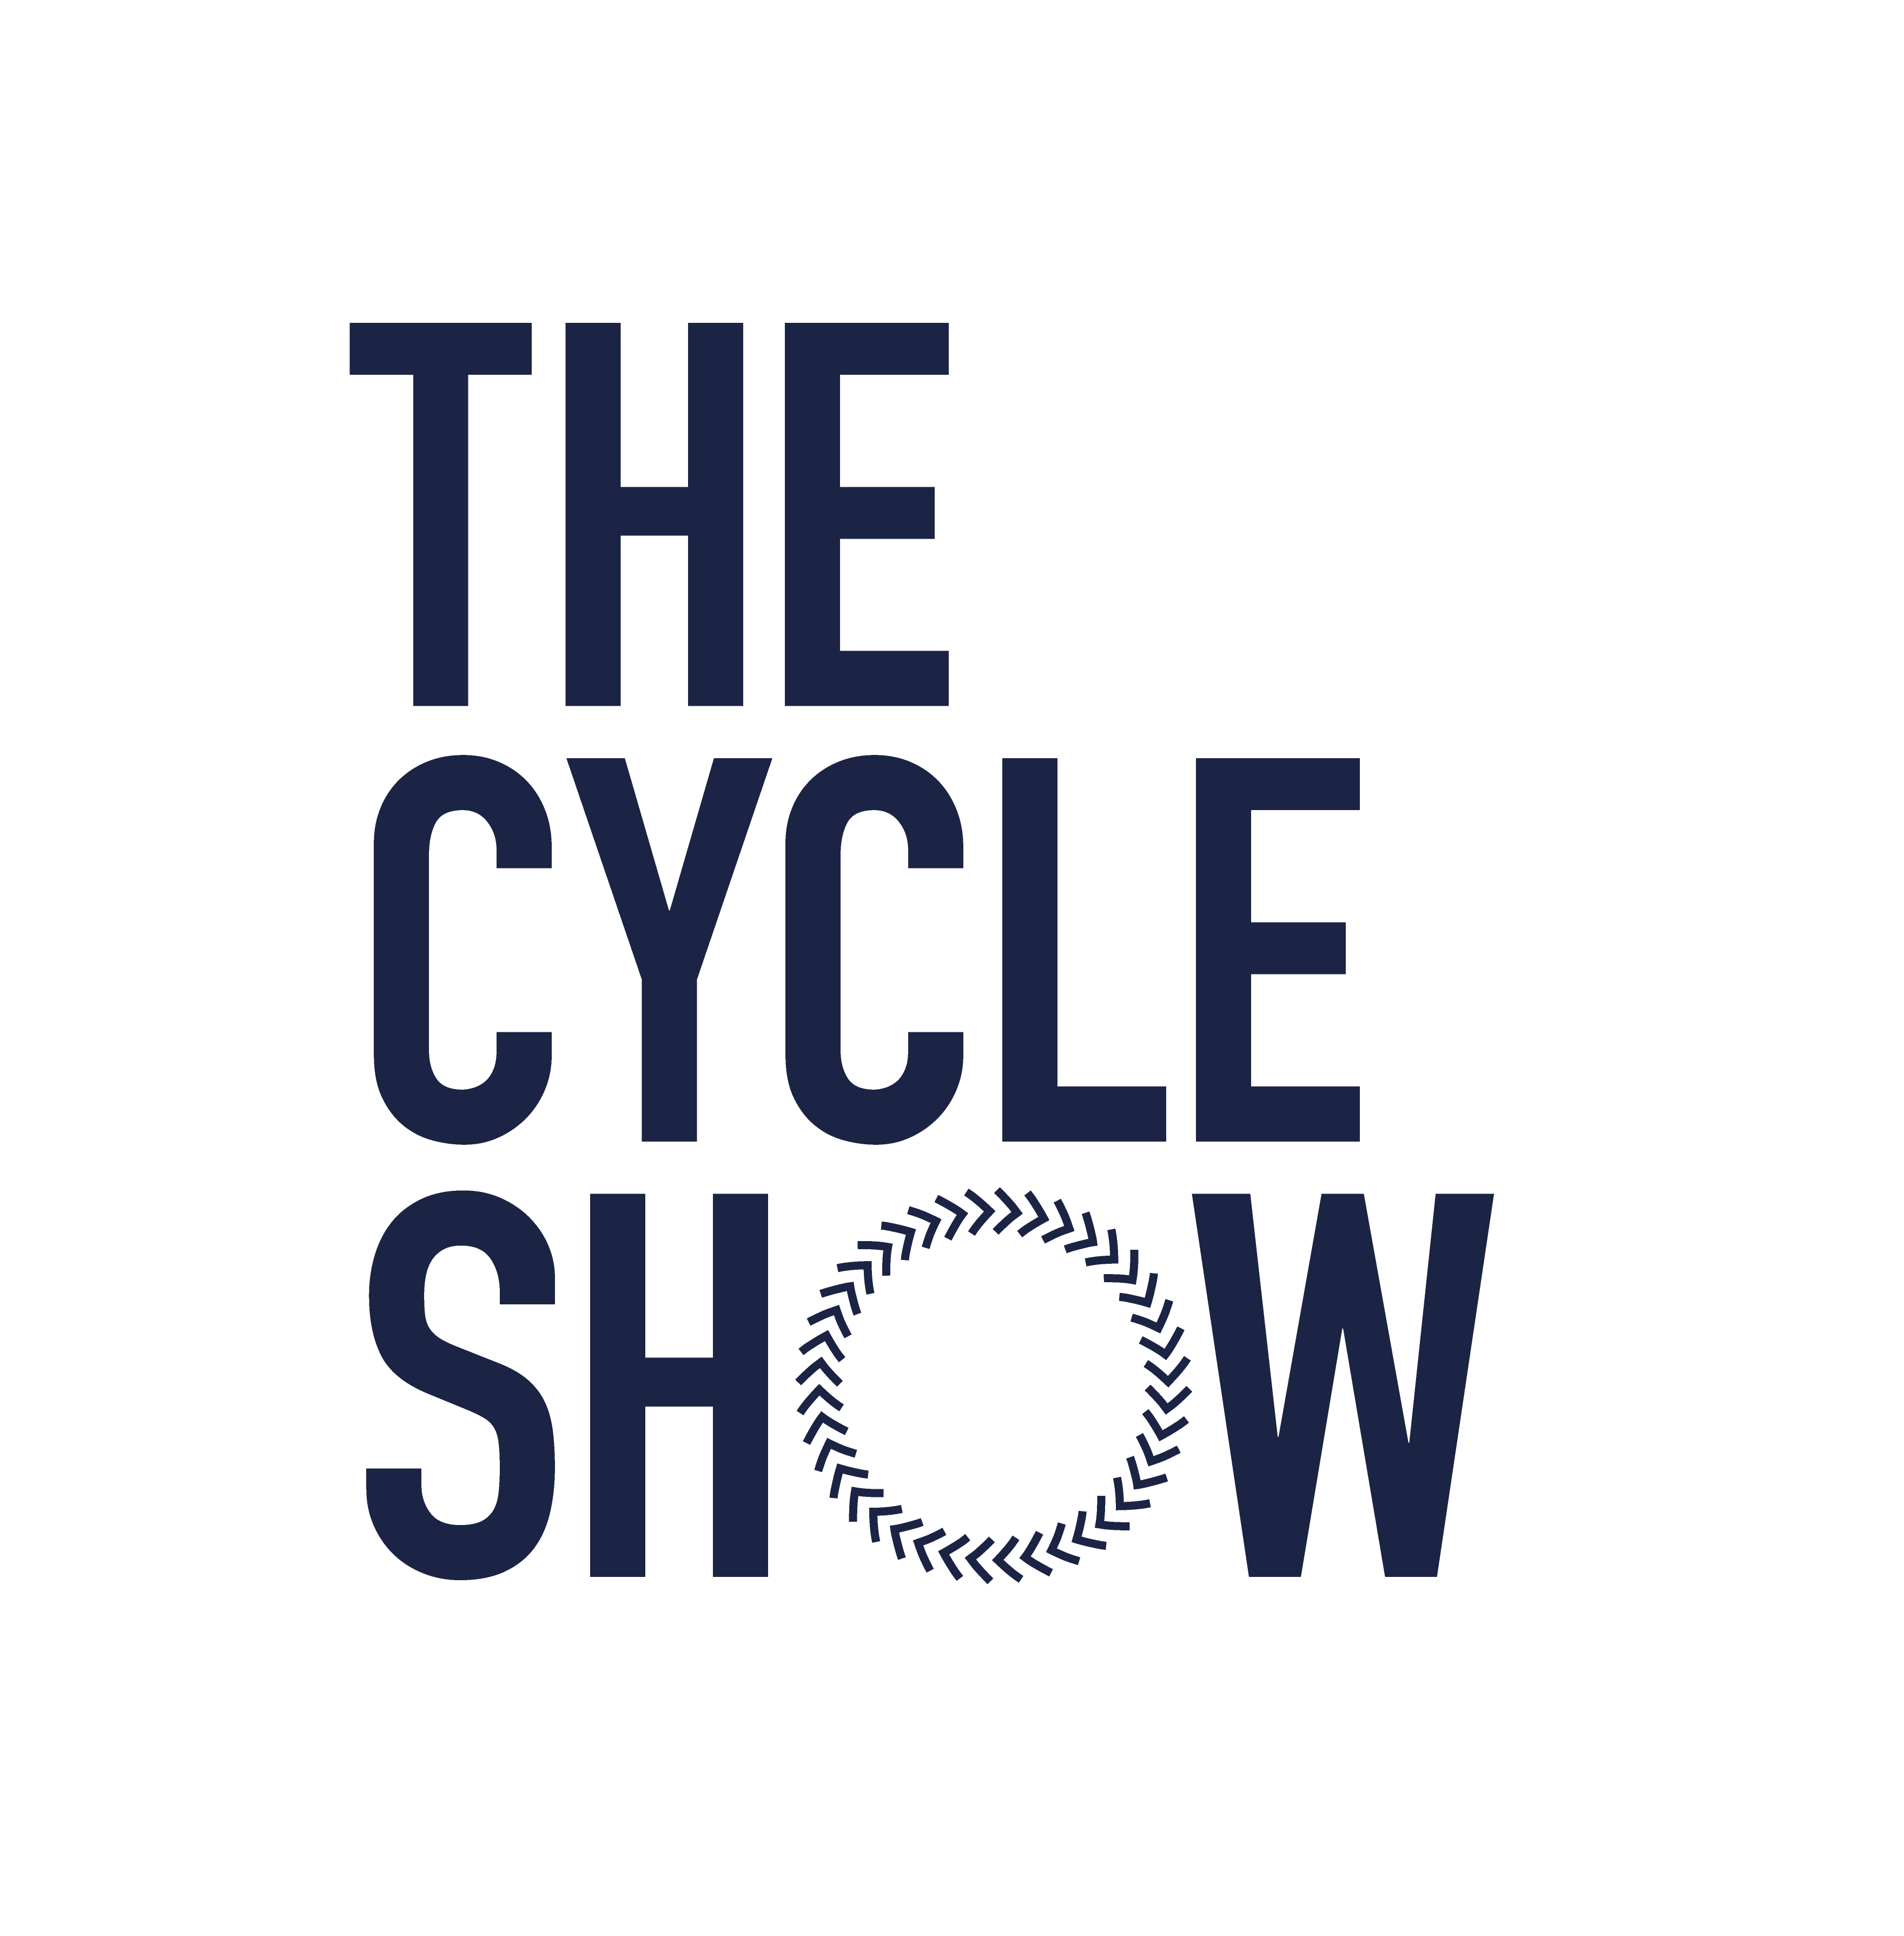 Cycle Show